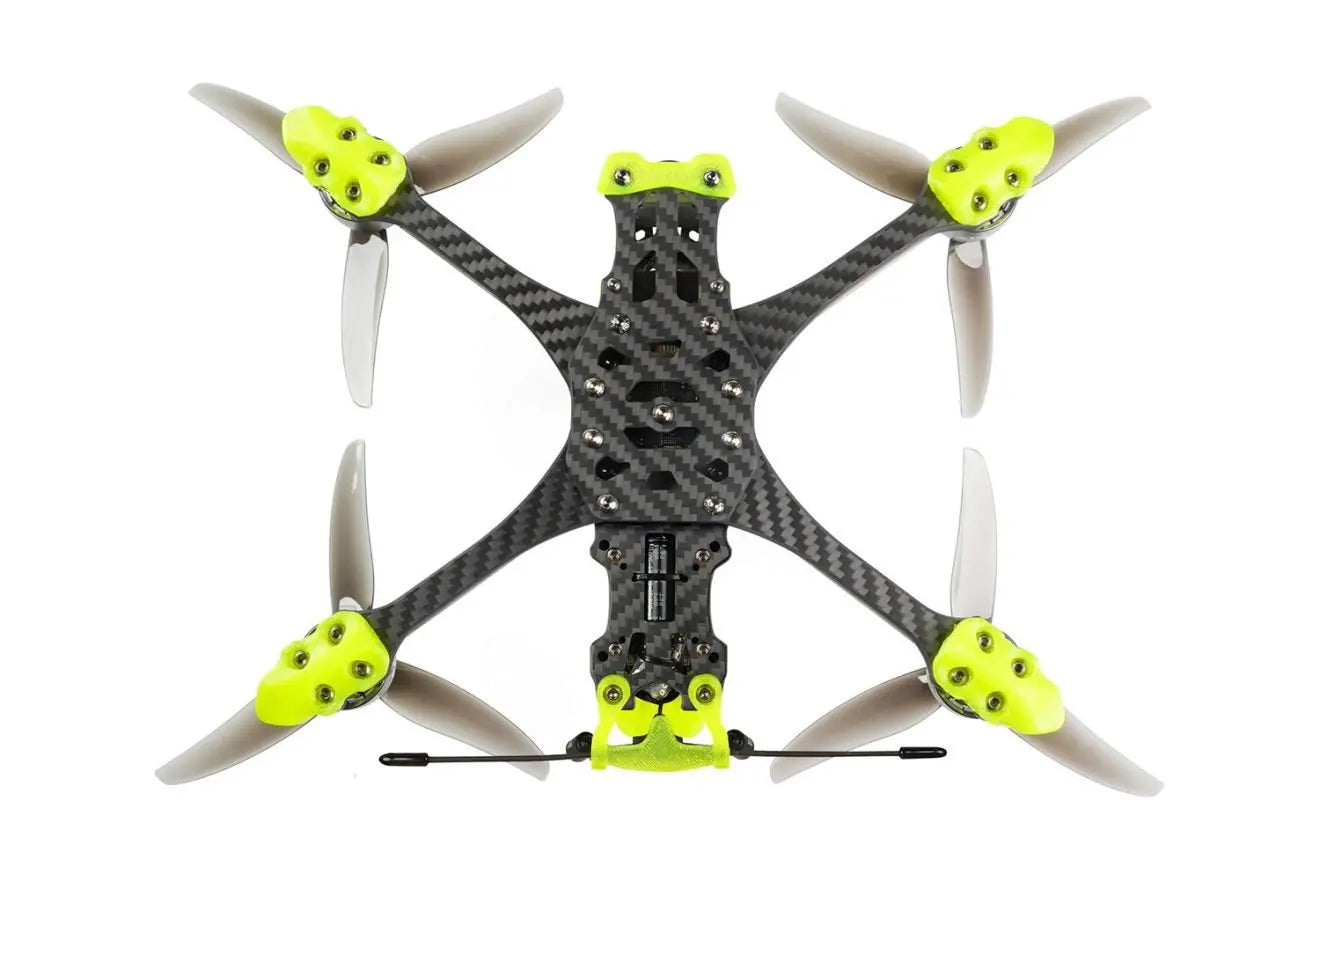 MARK5 HD AVATAR Freestyle FPV Drone, unique shock absorbing structure design, less vibrations and resonance provide a stable operating environment for